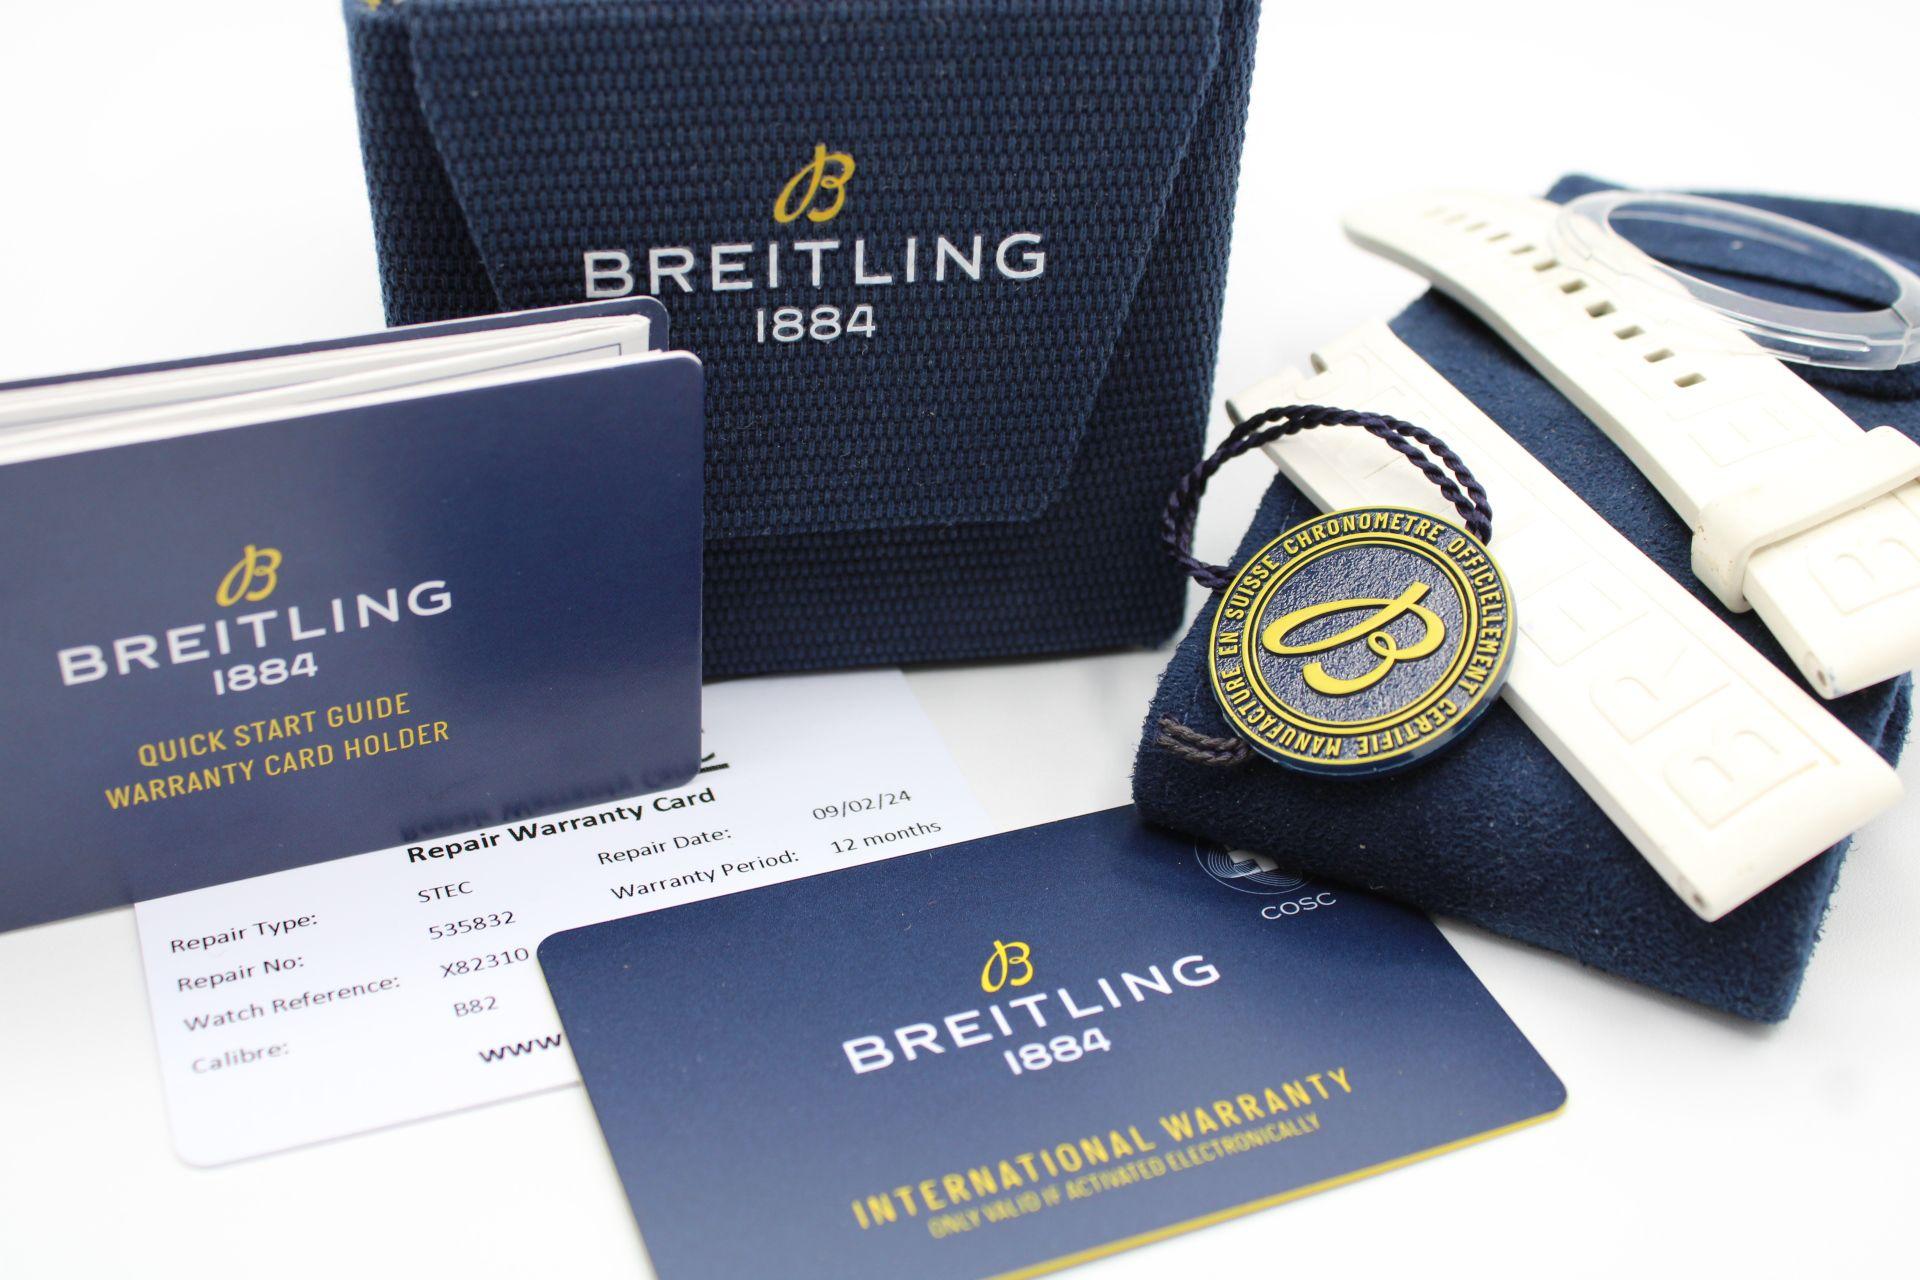 The Breitling Endurance Pro offers great value in a watch as well as being different and durable. This model the X82310 comes on its own along with our 12 month warranty. Original Warranty card, box, Additional Breitling White Rubber Strap and